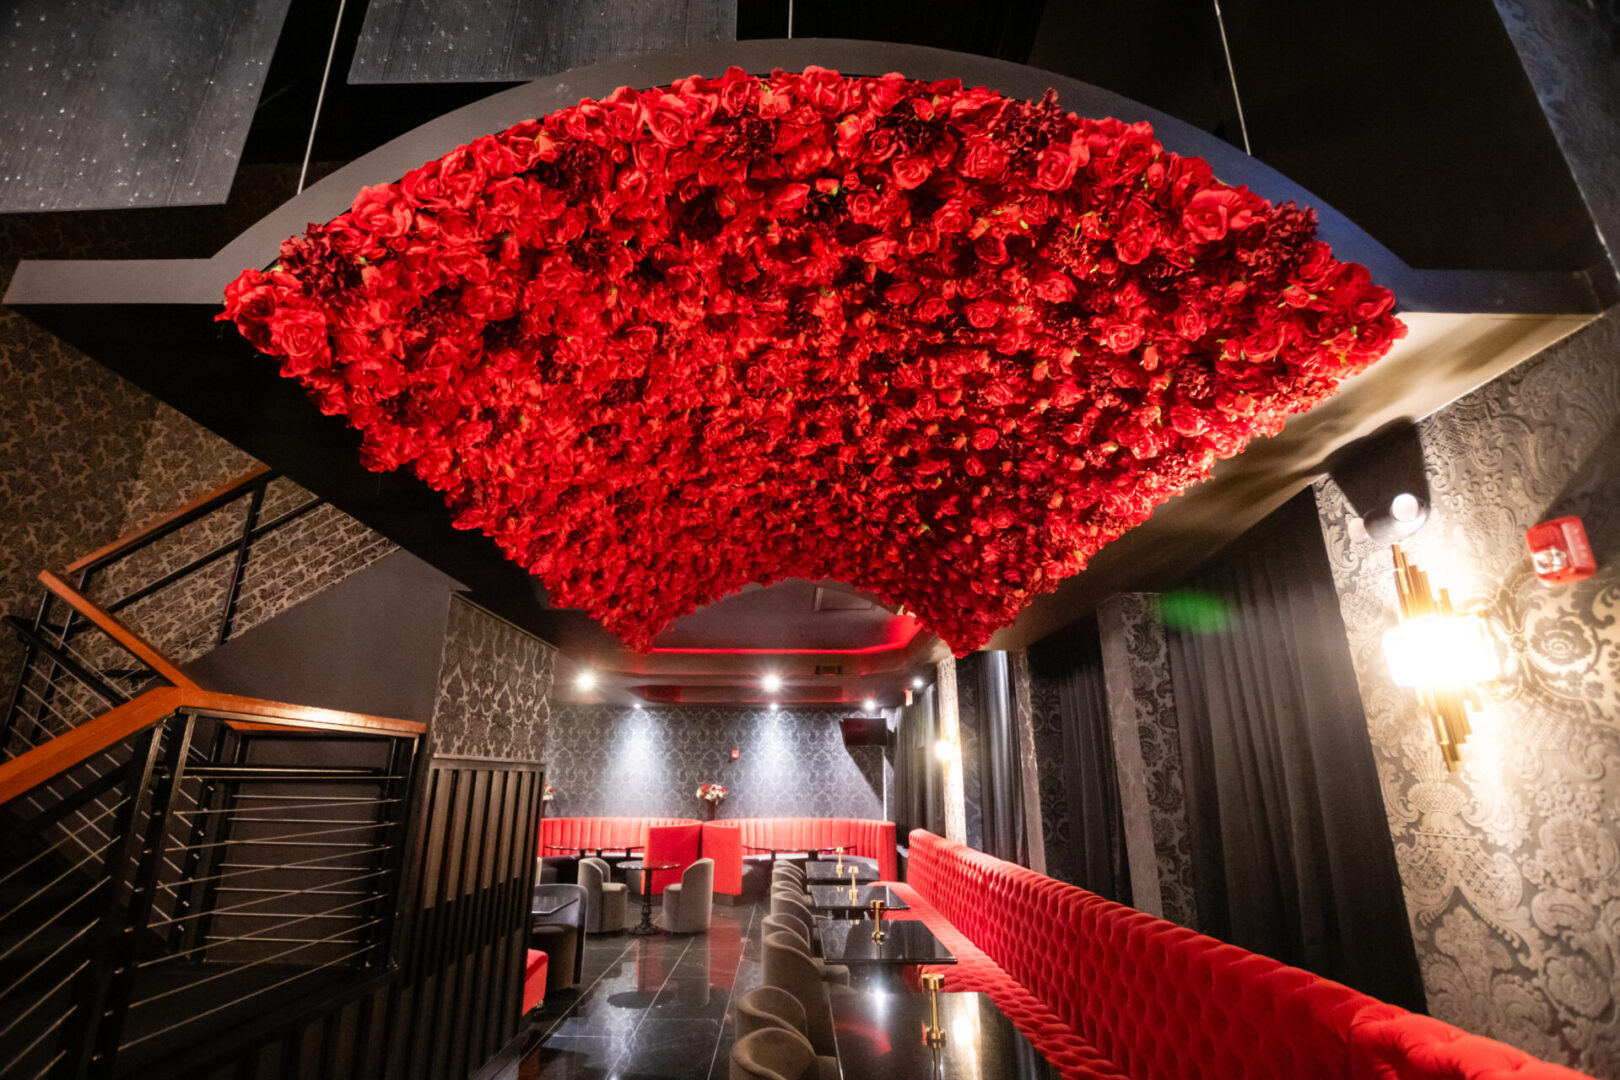 A luxury lounge with red flowers hanging from the ceiling.